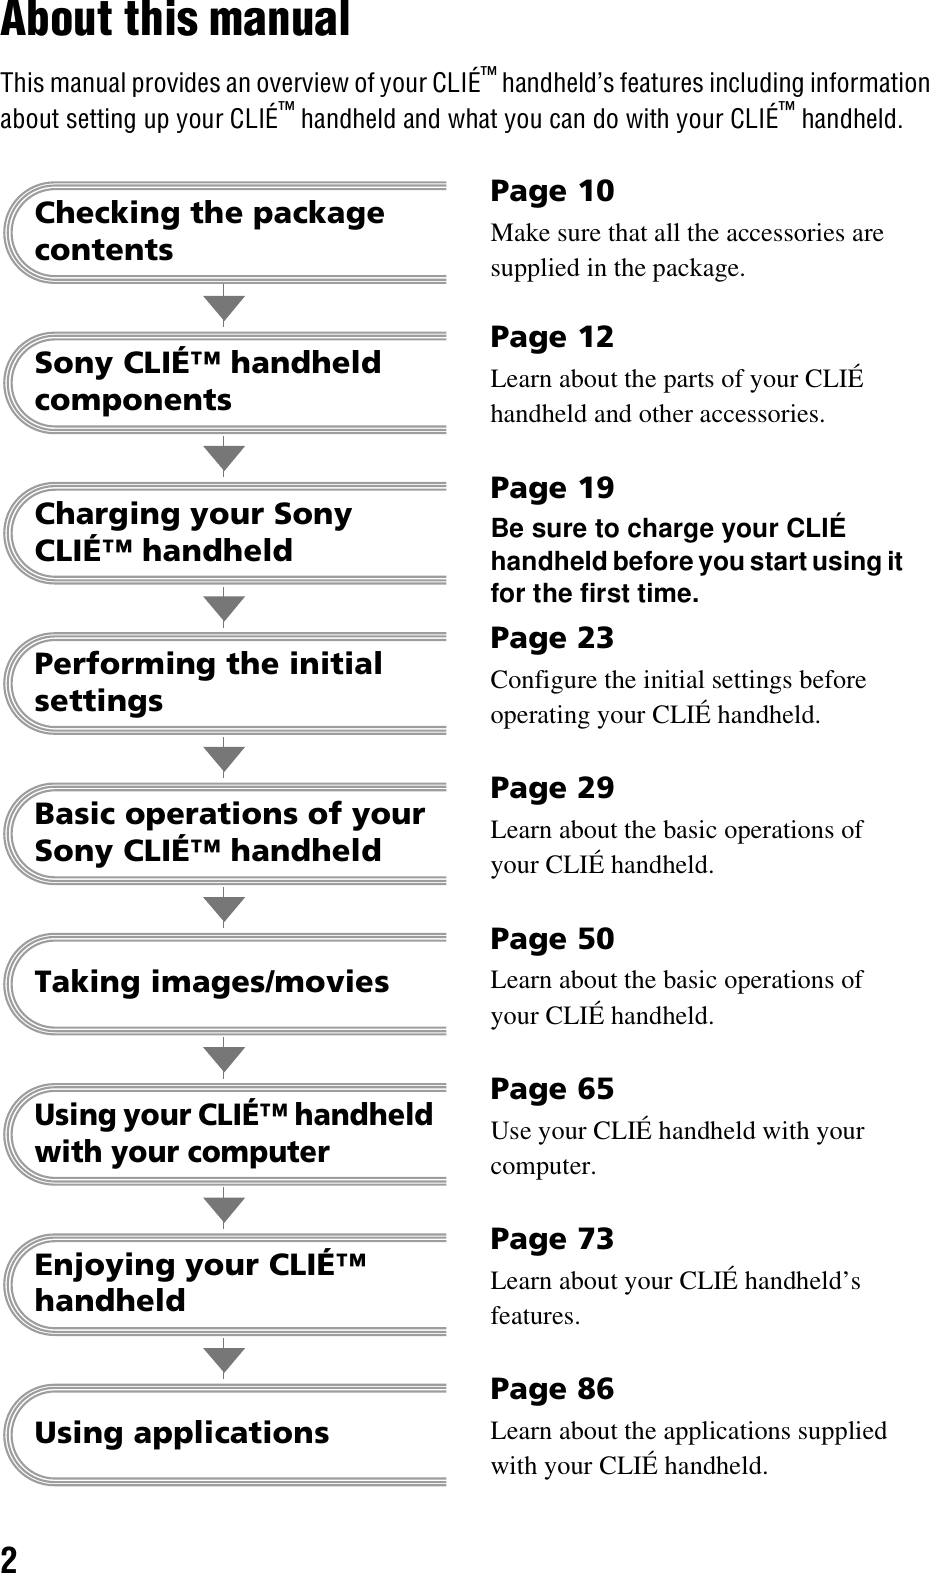 2About this manualThis manual provides an overview of your CLIÉ™ handheld’s features including information about setting up your CLIÉ™ handheld and what you can do with your CLIÉ™ handheld.Checking the package contentsSony CLIÉ™ handheld componentsCharging your Sony CLIÉ™ handheldPerforming the initial settingsBasic operations of your Sony CLIÉ™ handheldUsing applicationsPage 10Make sure that all the accessories are supplied in the package.Page 12Learn about the parts of your CLIÉ handheld and other accessories.Page 19Be sure to charge your CLIÉ handheld before you start using it for the first time.Page 23Configure the initial settings before operating your CLIÉ handheld.Page 29Learn about the basic operations of your CLIÉ handheld.Page 73Learn about your CLIÉ handheld’s features.Page 86Learn about the applications supplied with your CLIÉ handheld.Enjoying your CLIÉ™ handheldTaking images/moviesUsing your CLIÉ™ handheld with your computerPage 50Learn about the basic operations of your CLIÉ handheld.Page 65Use your CLIÉ handheld with your computer.